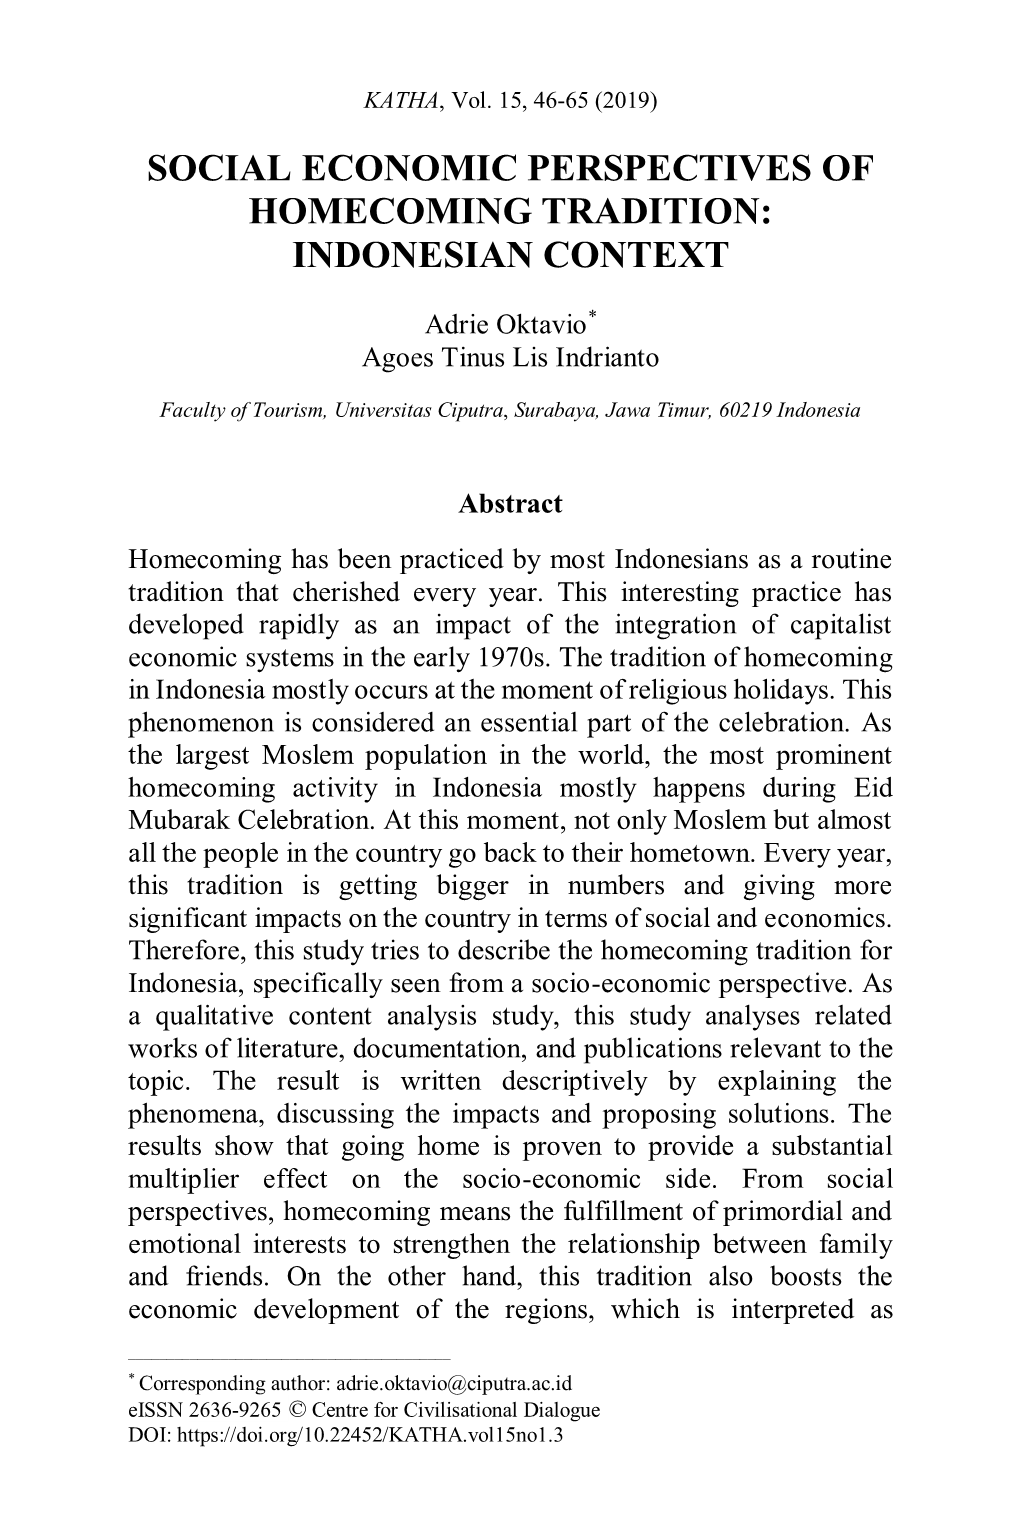 Social Economic Perspectives of Homecoming Tradition: Indonesian Context